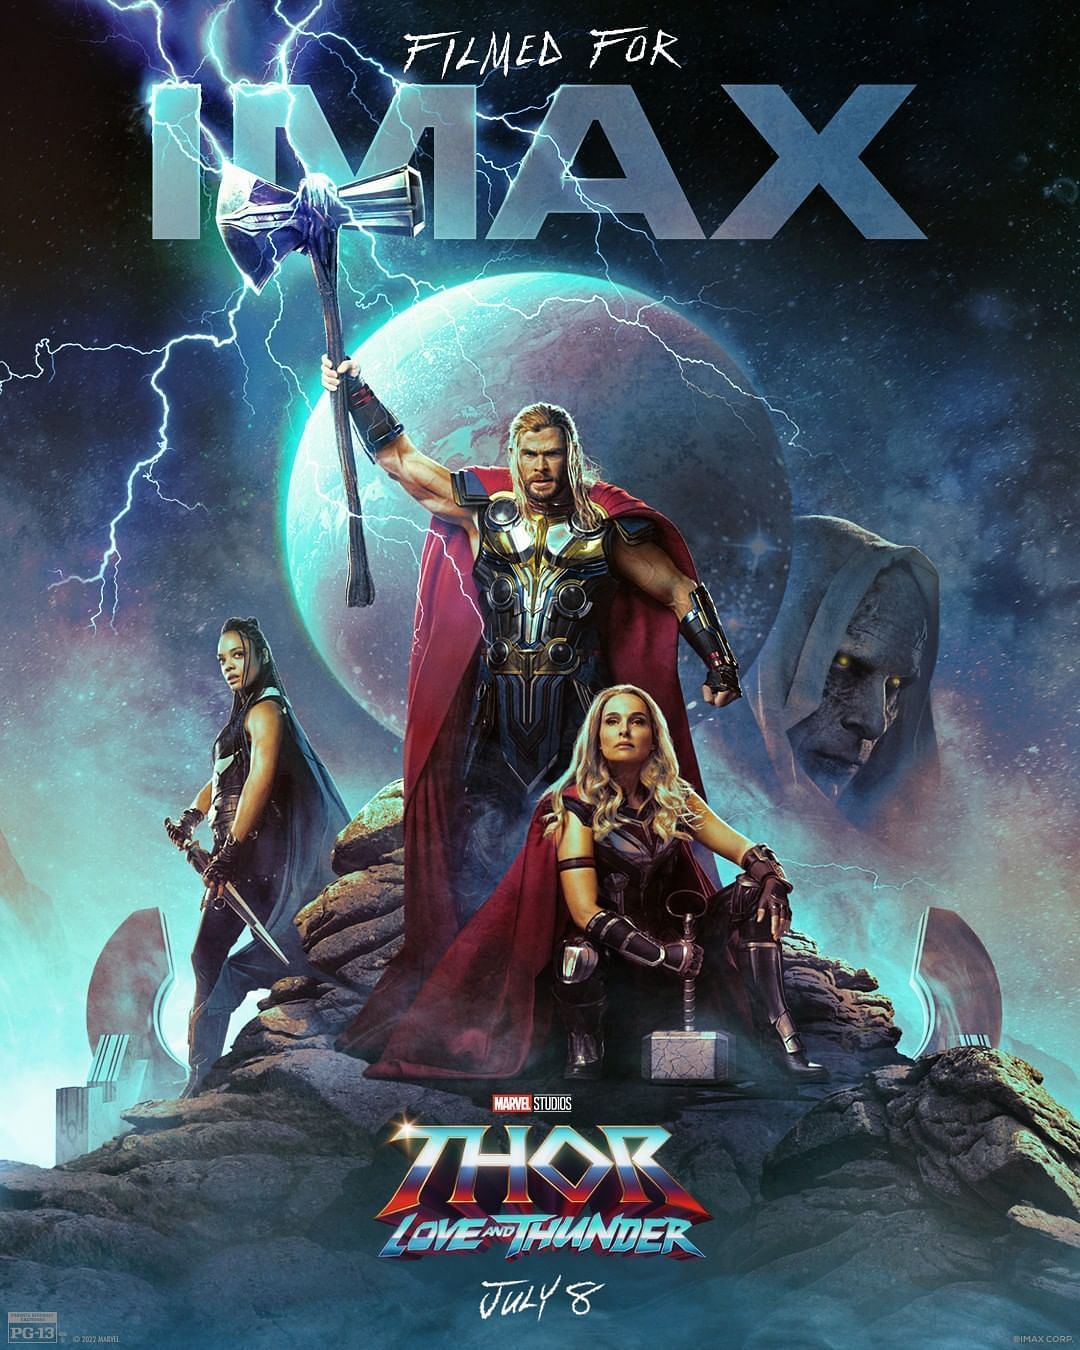 What is Thor Love and Thunder about?